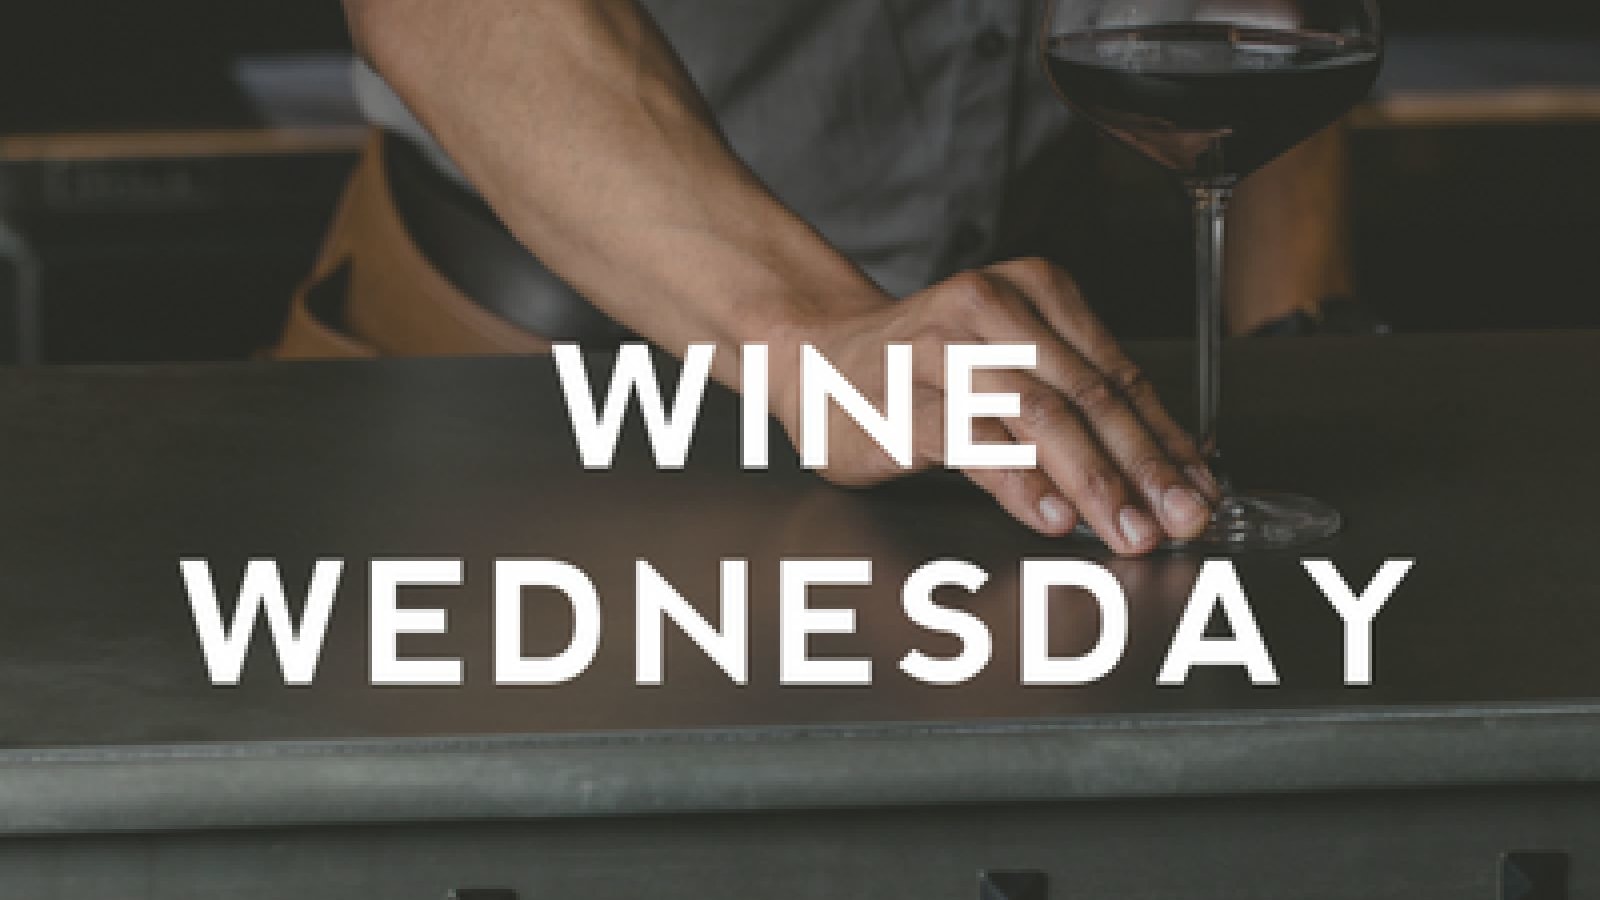 Wine Wednesday at Reverence